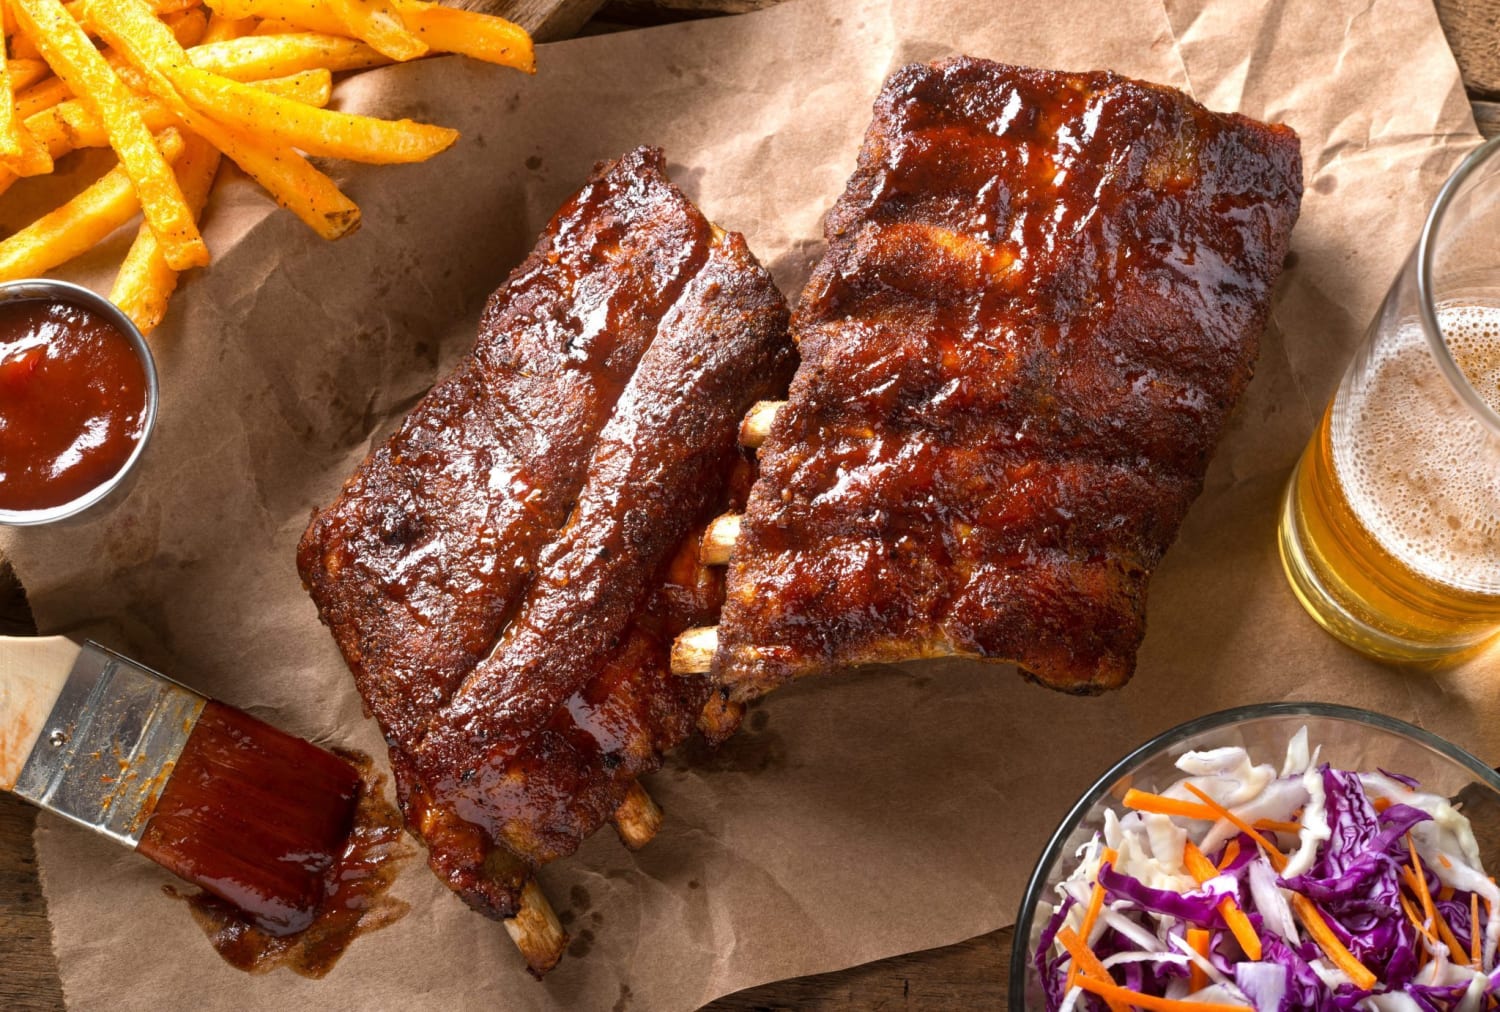 Show Your Taste Buds Why Kansas City is the BBQ Capital of the World